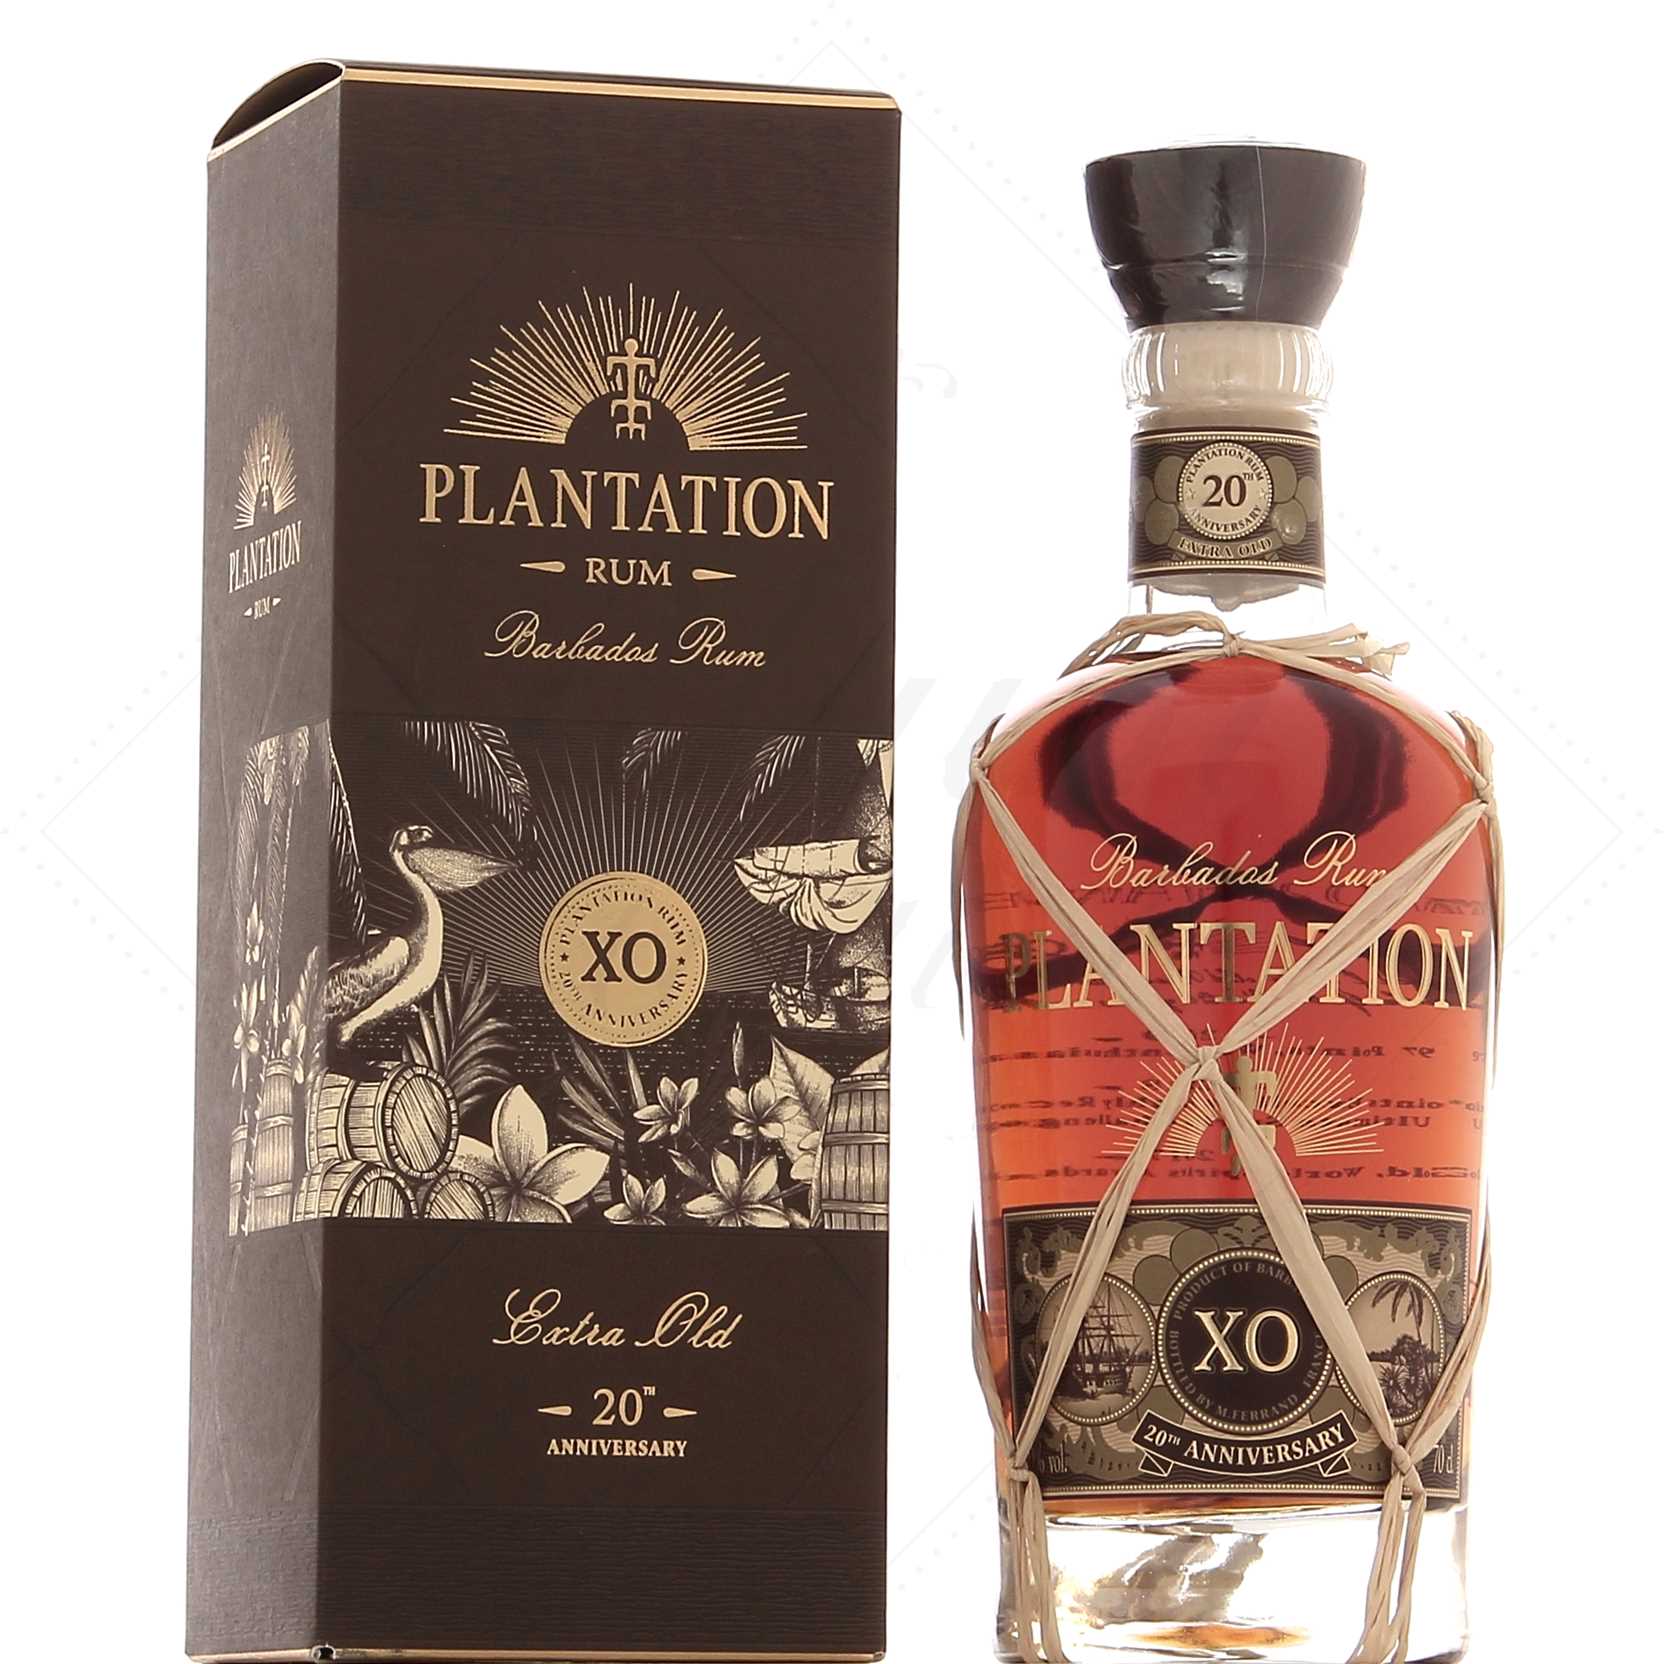 Discover all rum of Plantation Rum on Excellence Rhum